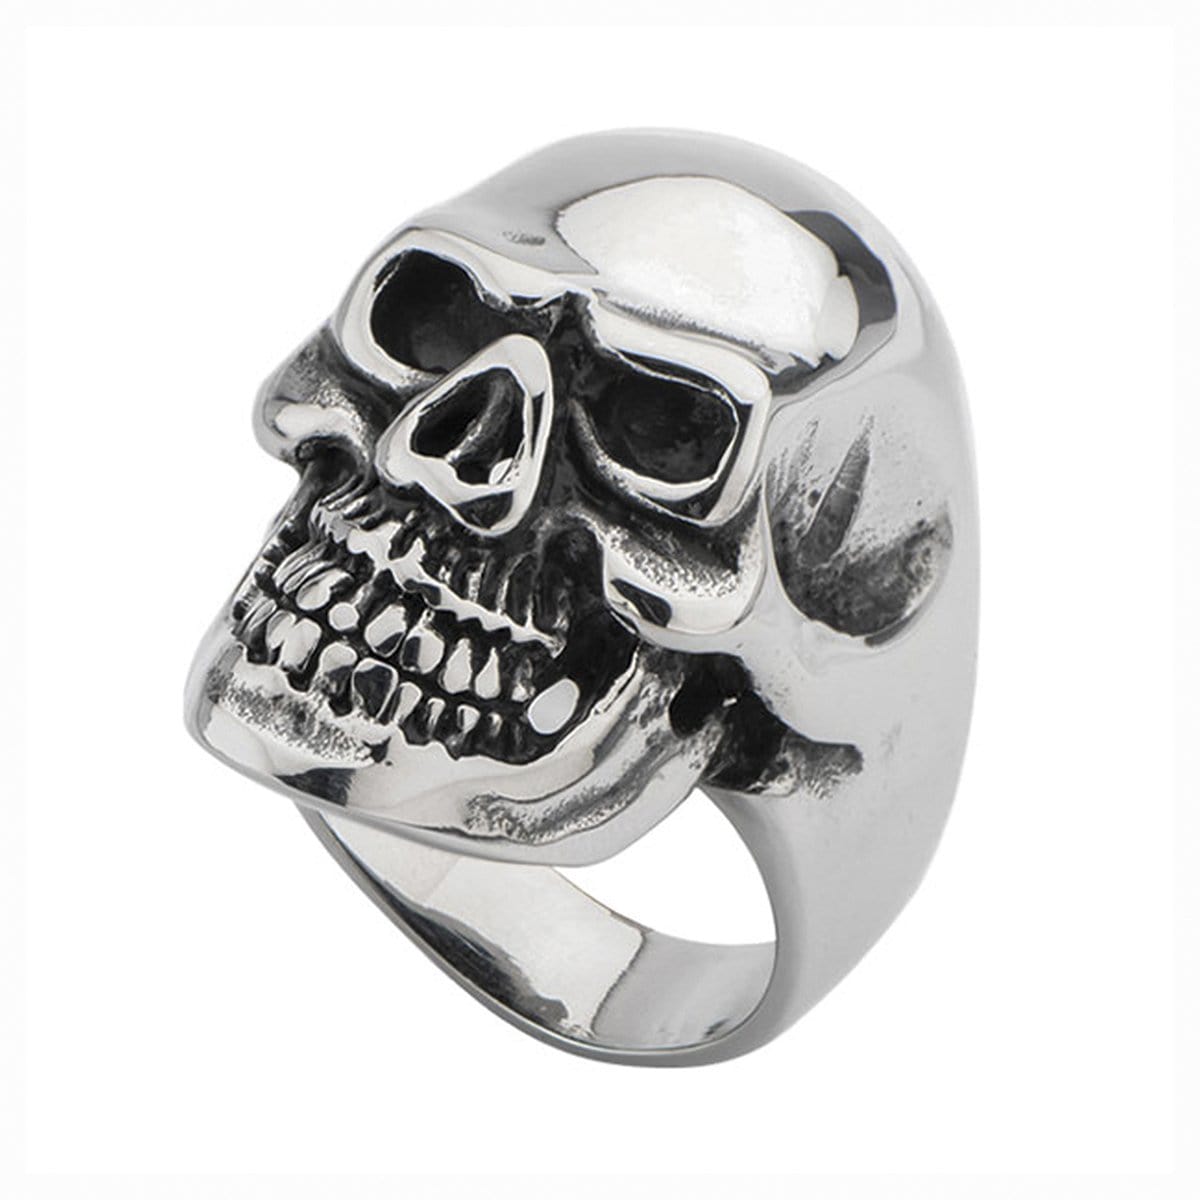 INOX JEWELRY Rings Antiqued Silver Tone Stainless Steel Grinning Skull Ring